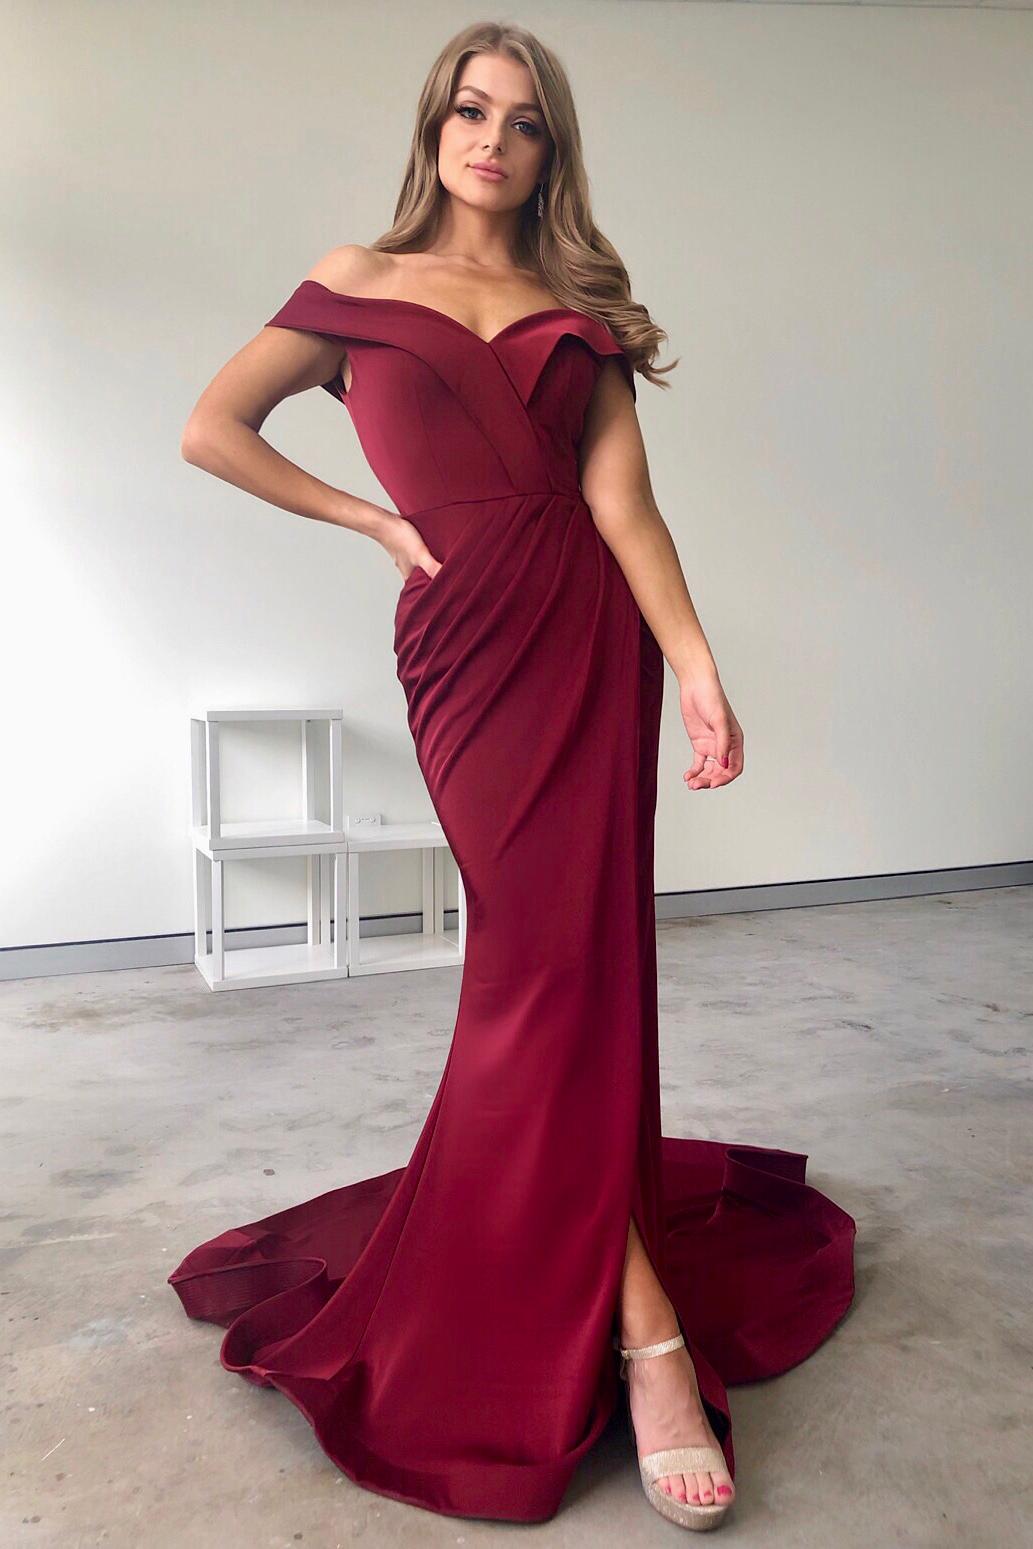 Tinaholy Couture BA306 Wine French Satin Off Shoulder Mermaid Dress Tina Holly Couture$ AfterPay Humm ZipPay LayBuy Sezzle